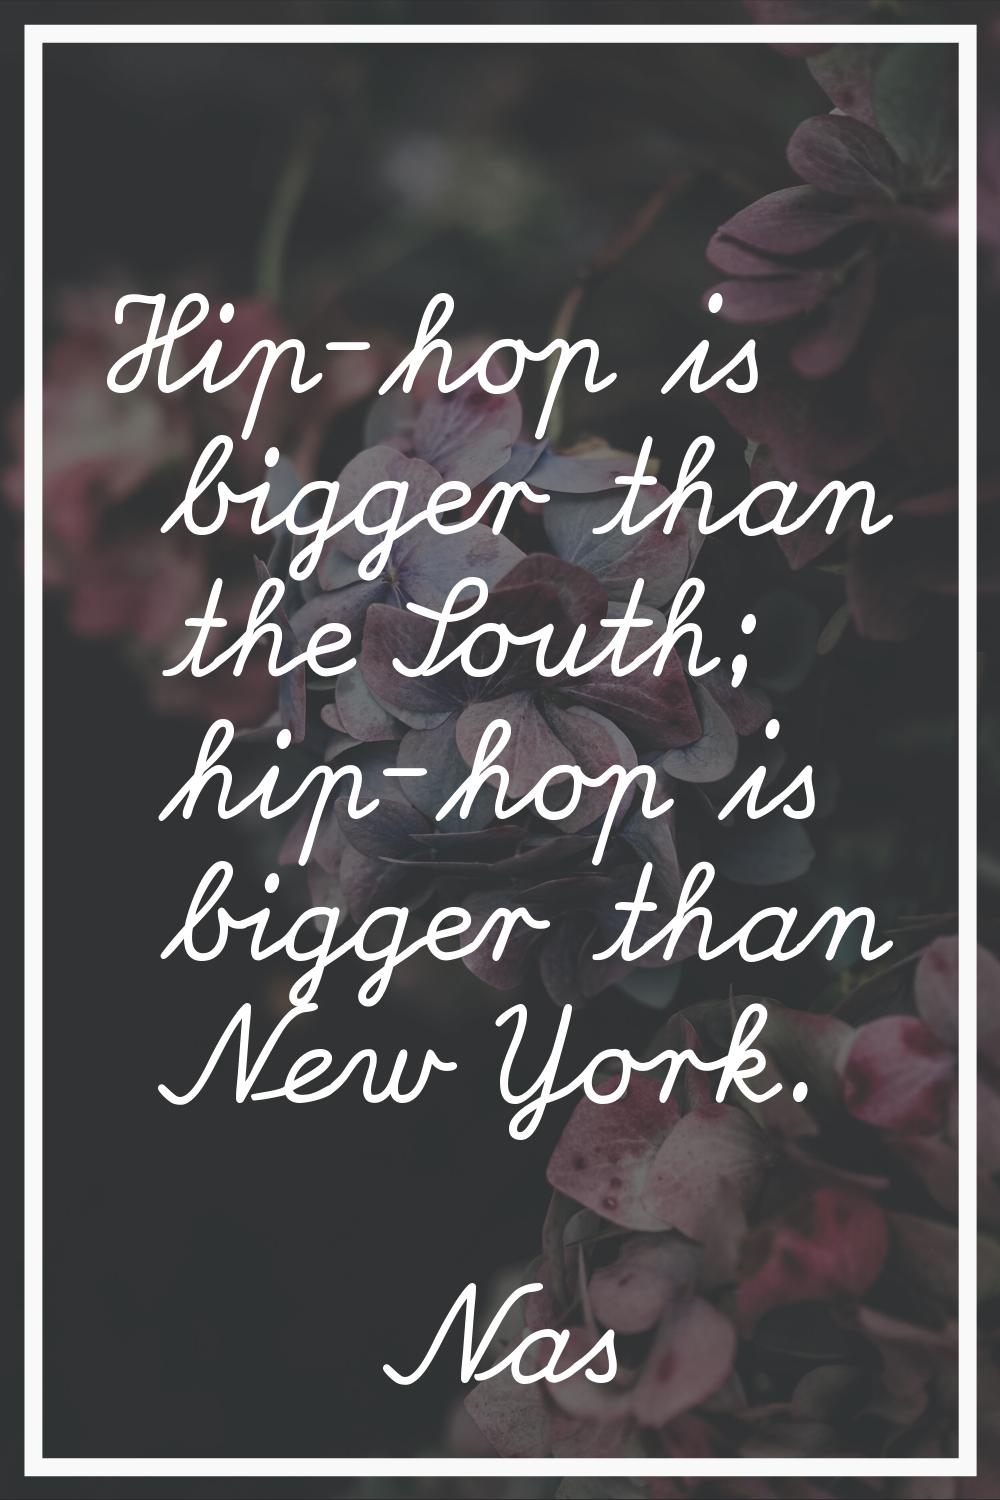 Hip-hop is bigger than the South; hip-hop is bigger than New York.